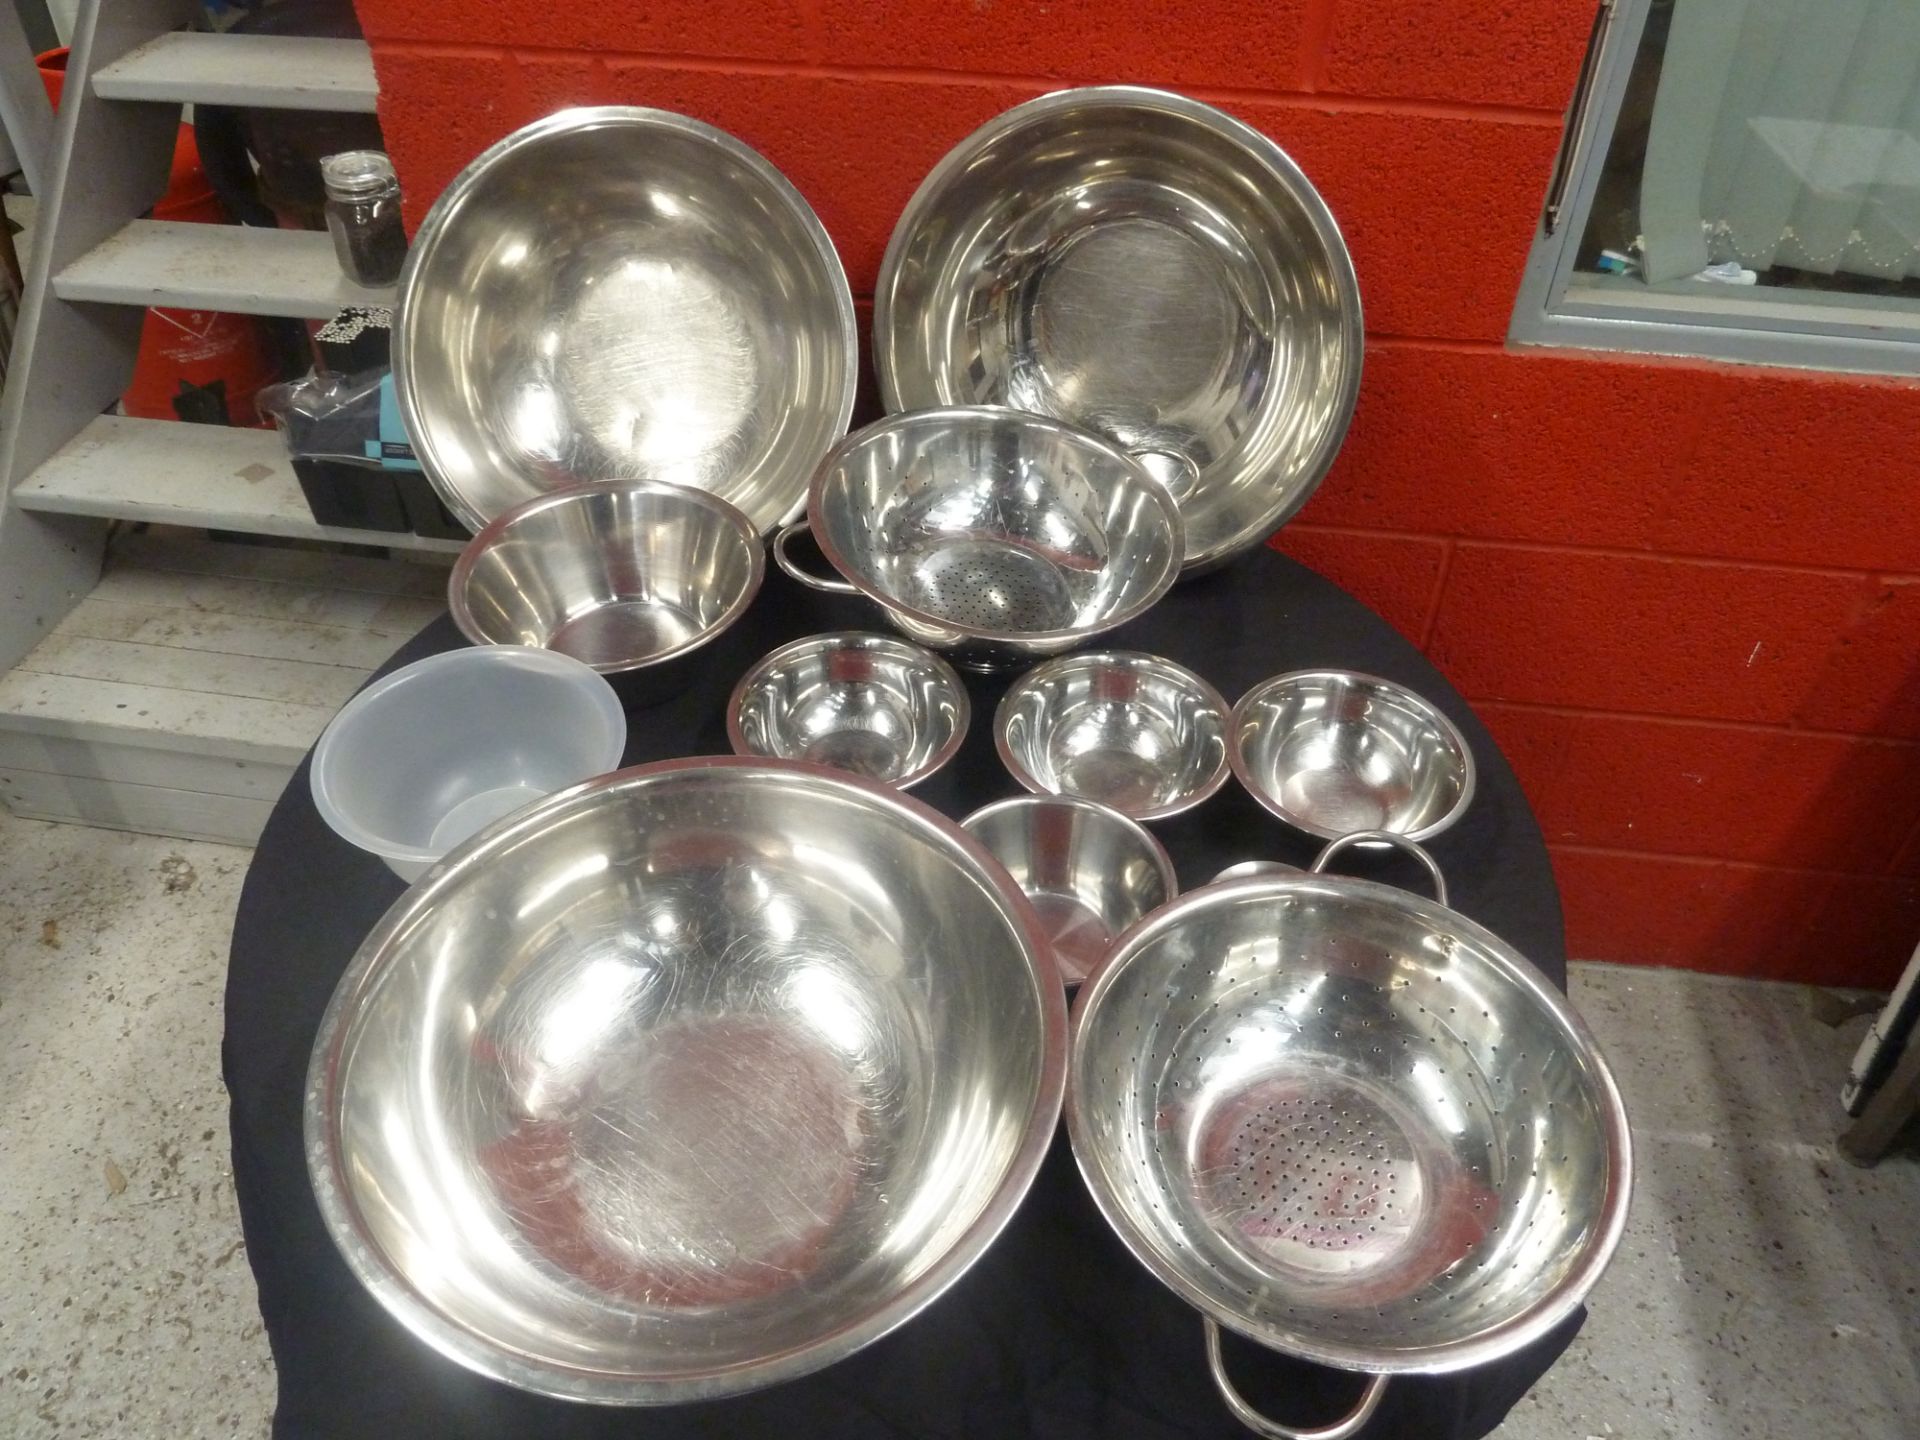 * Set of 9 stainless steel containers / sieves & 1 plastic container. All in excellent condition